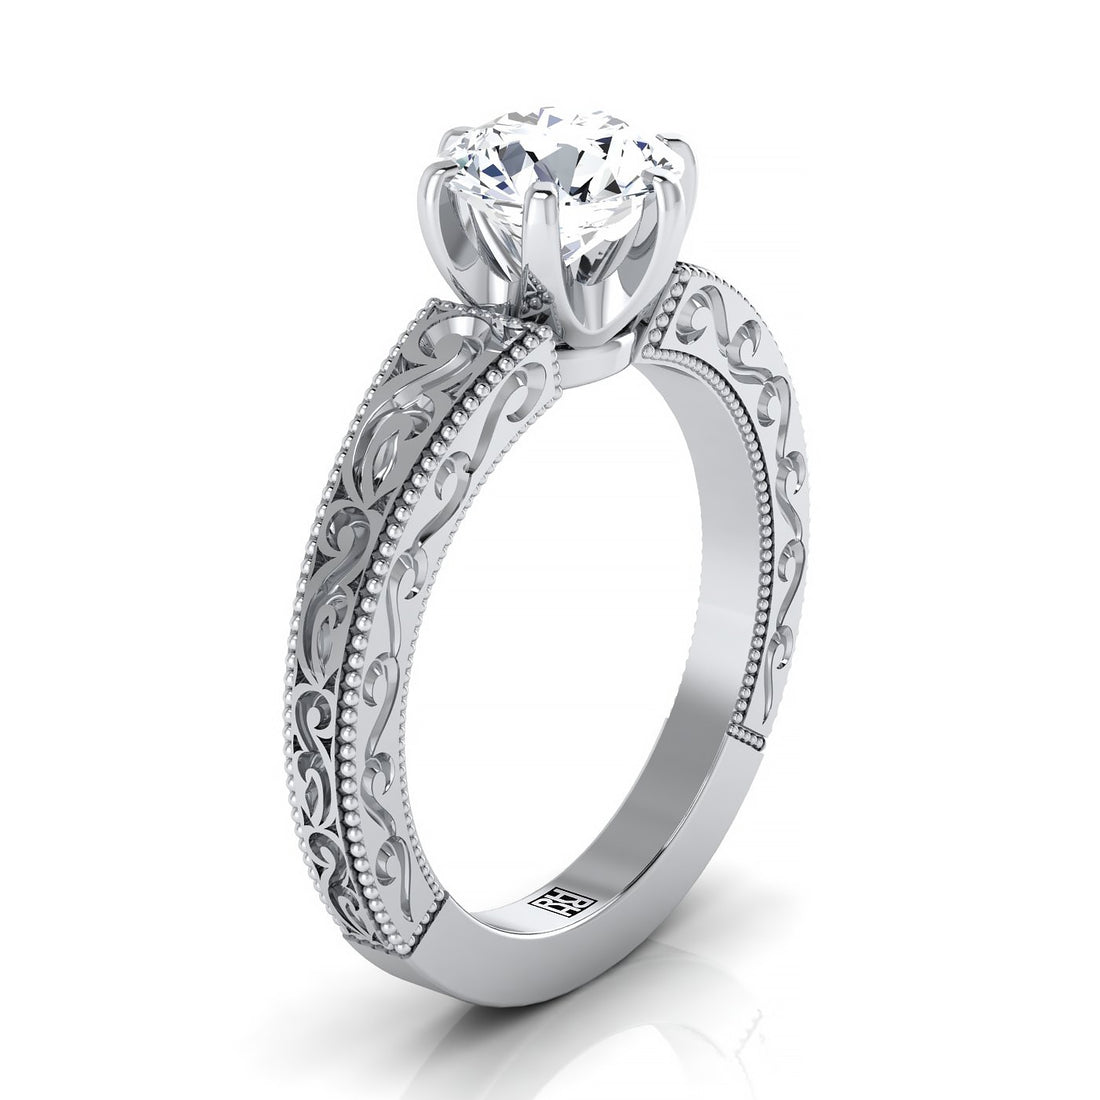 Why Choose Solitaires as Part of Engagement Rings Exchange Ceremony?